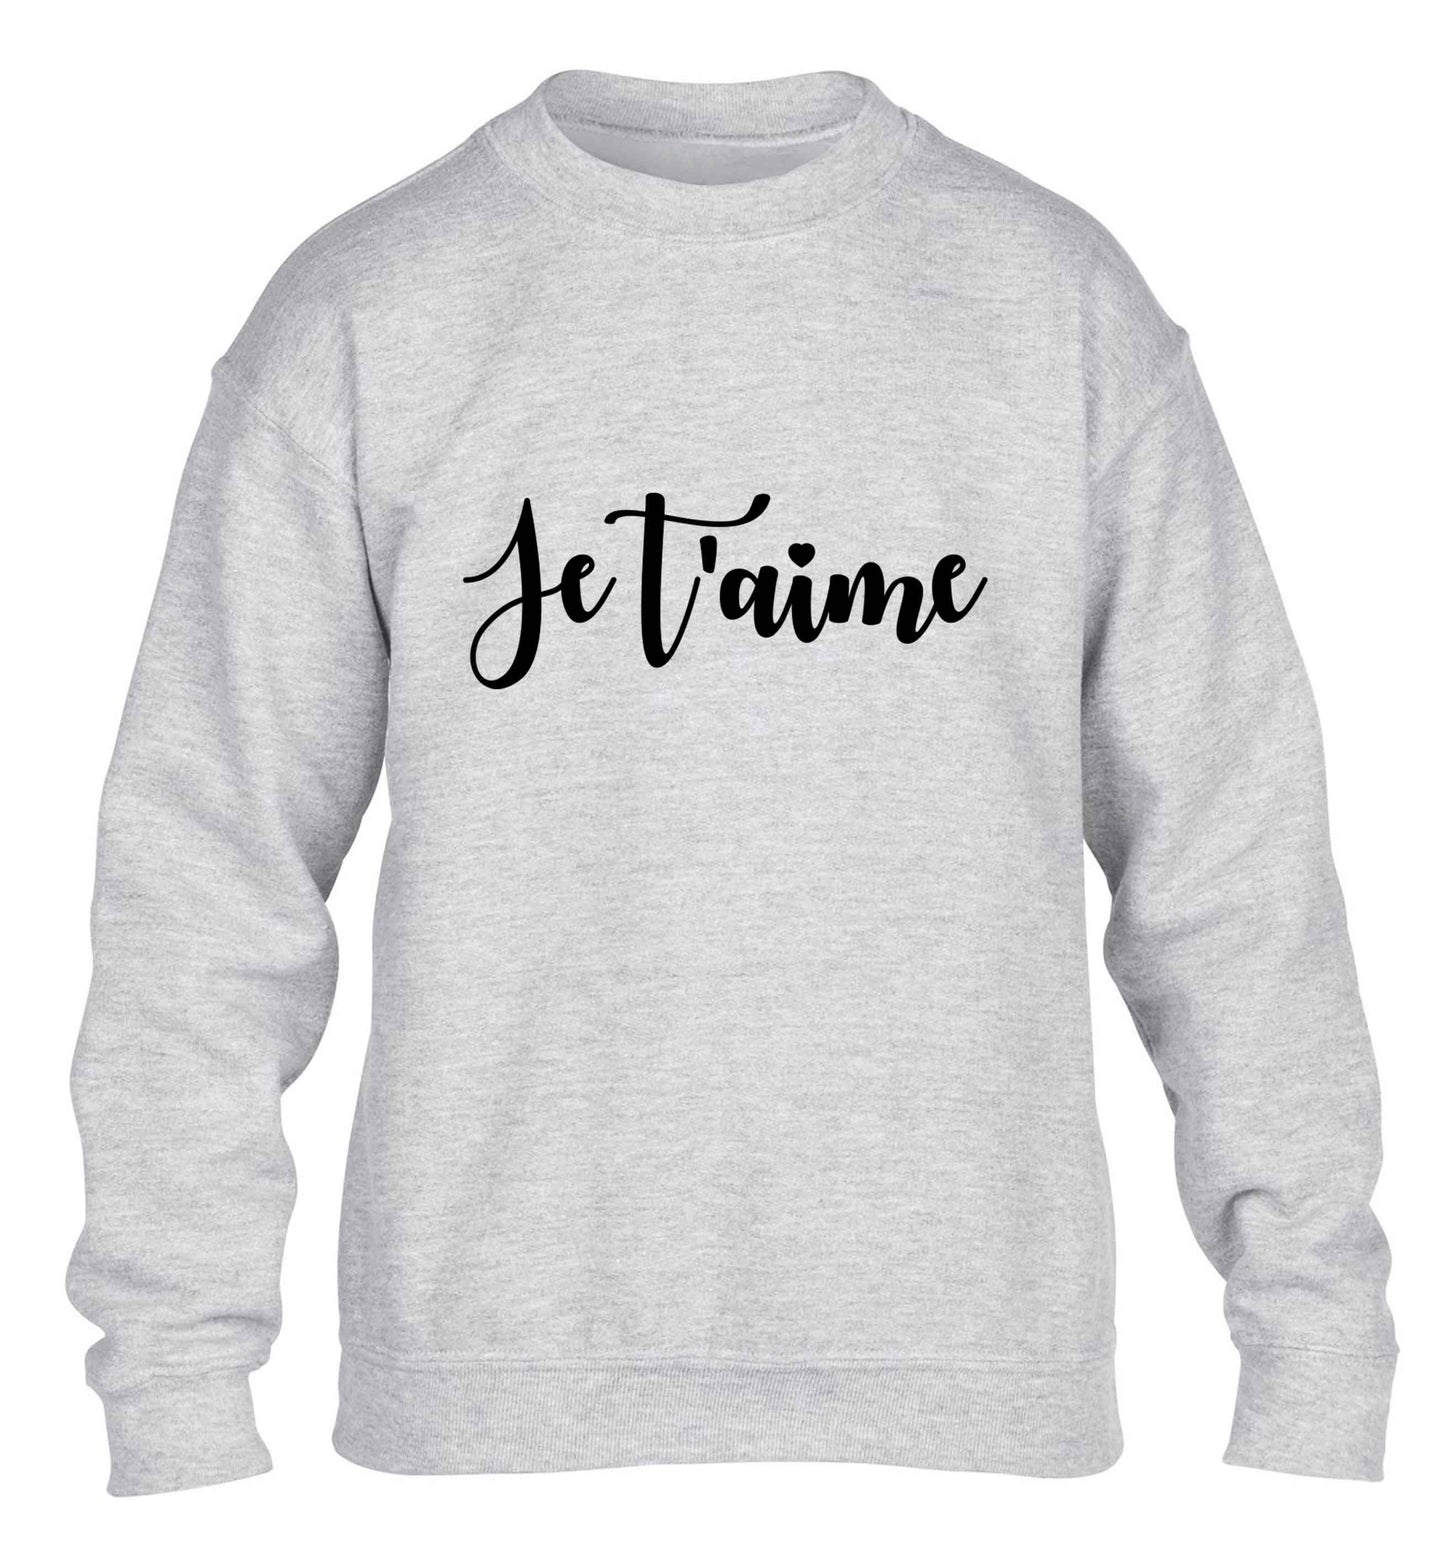 Je t'aime children's grey sweater 12-13 Years